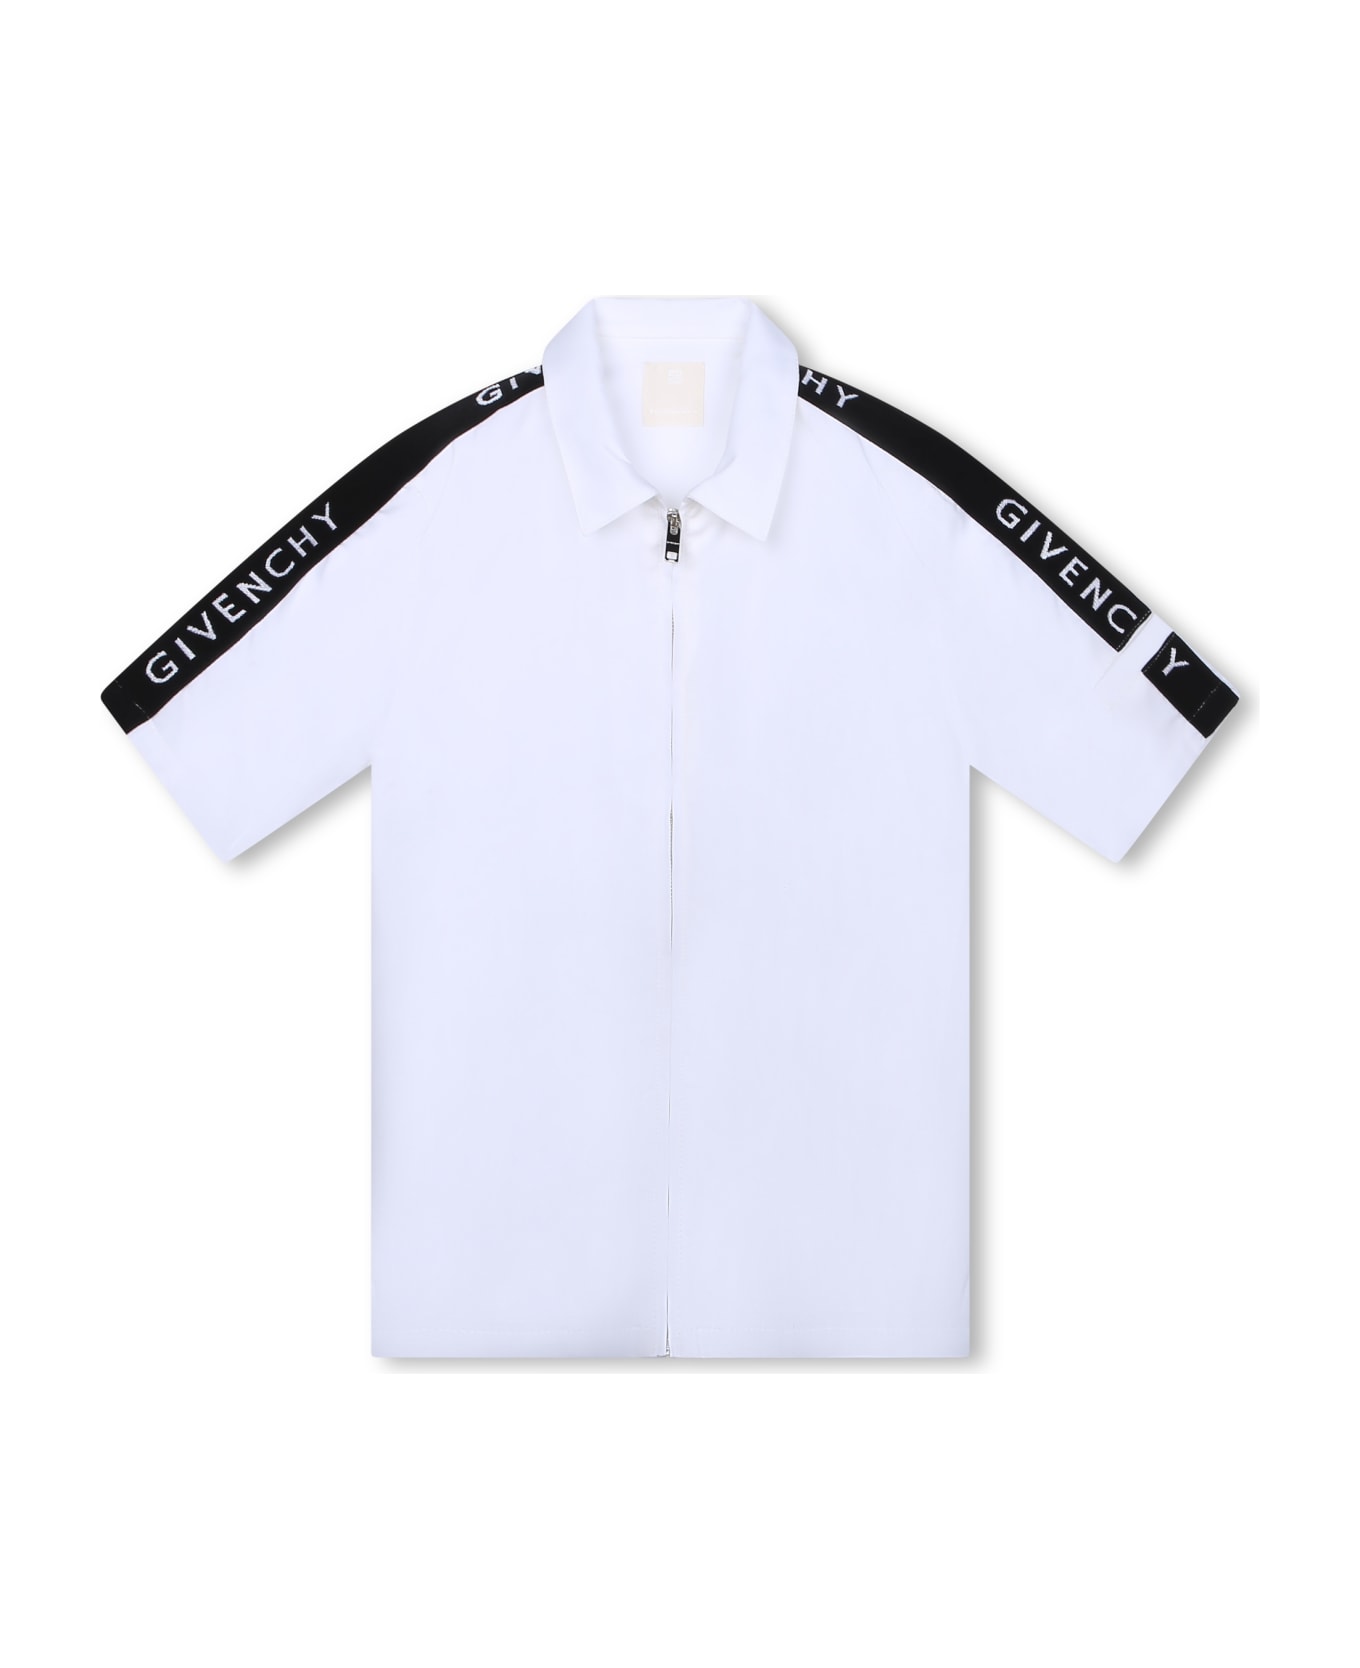 Givenchy Shirt With Print - White